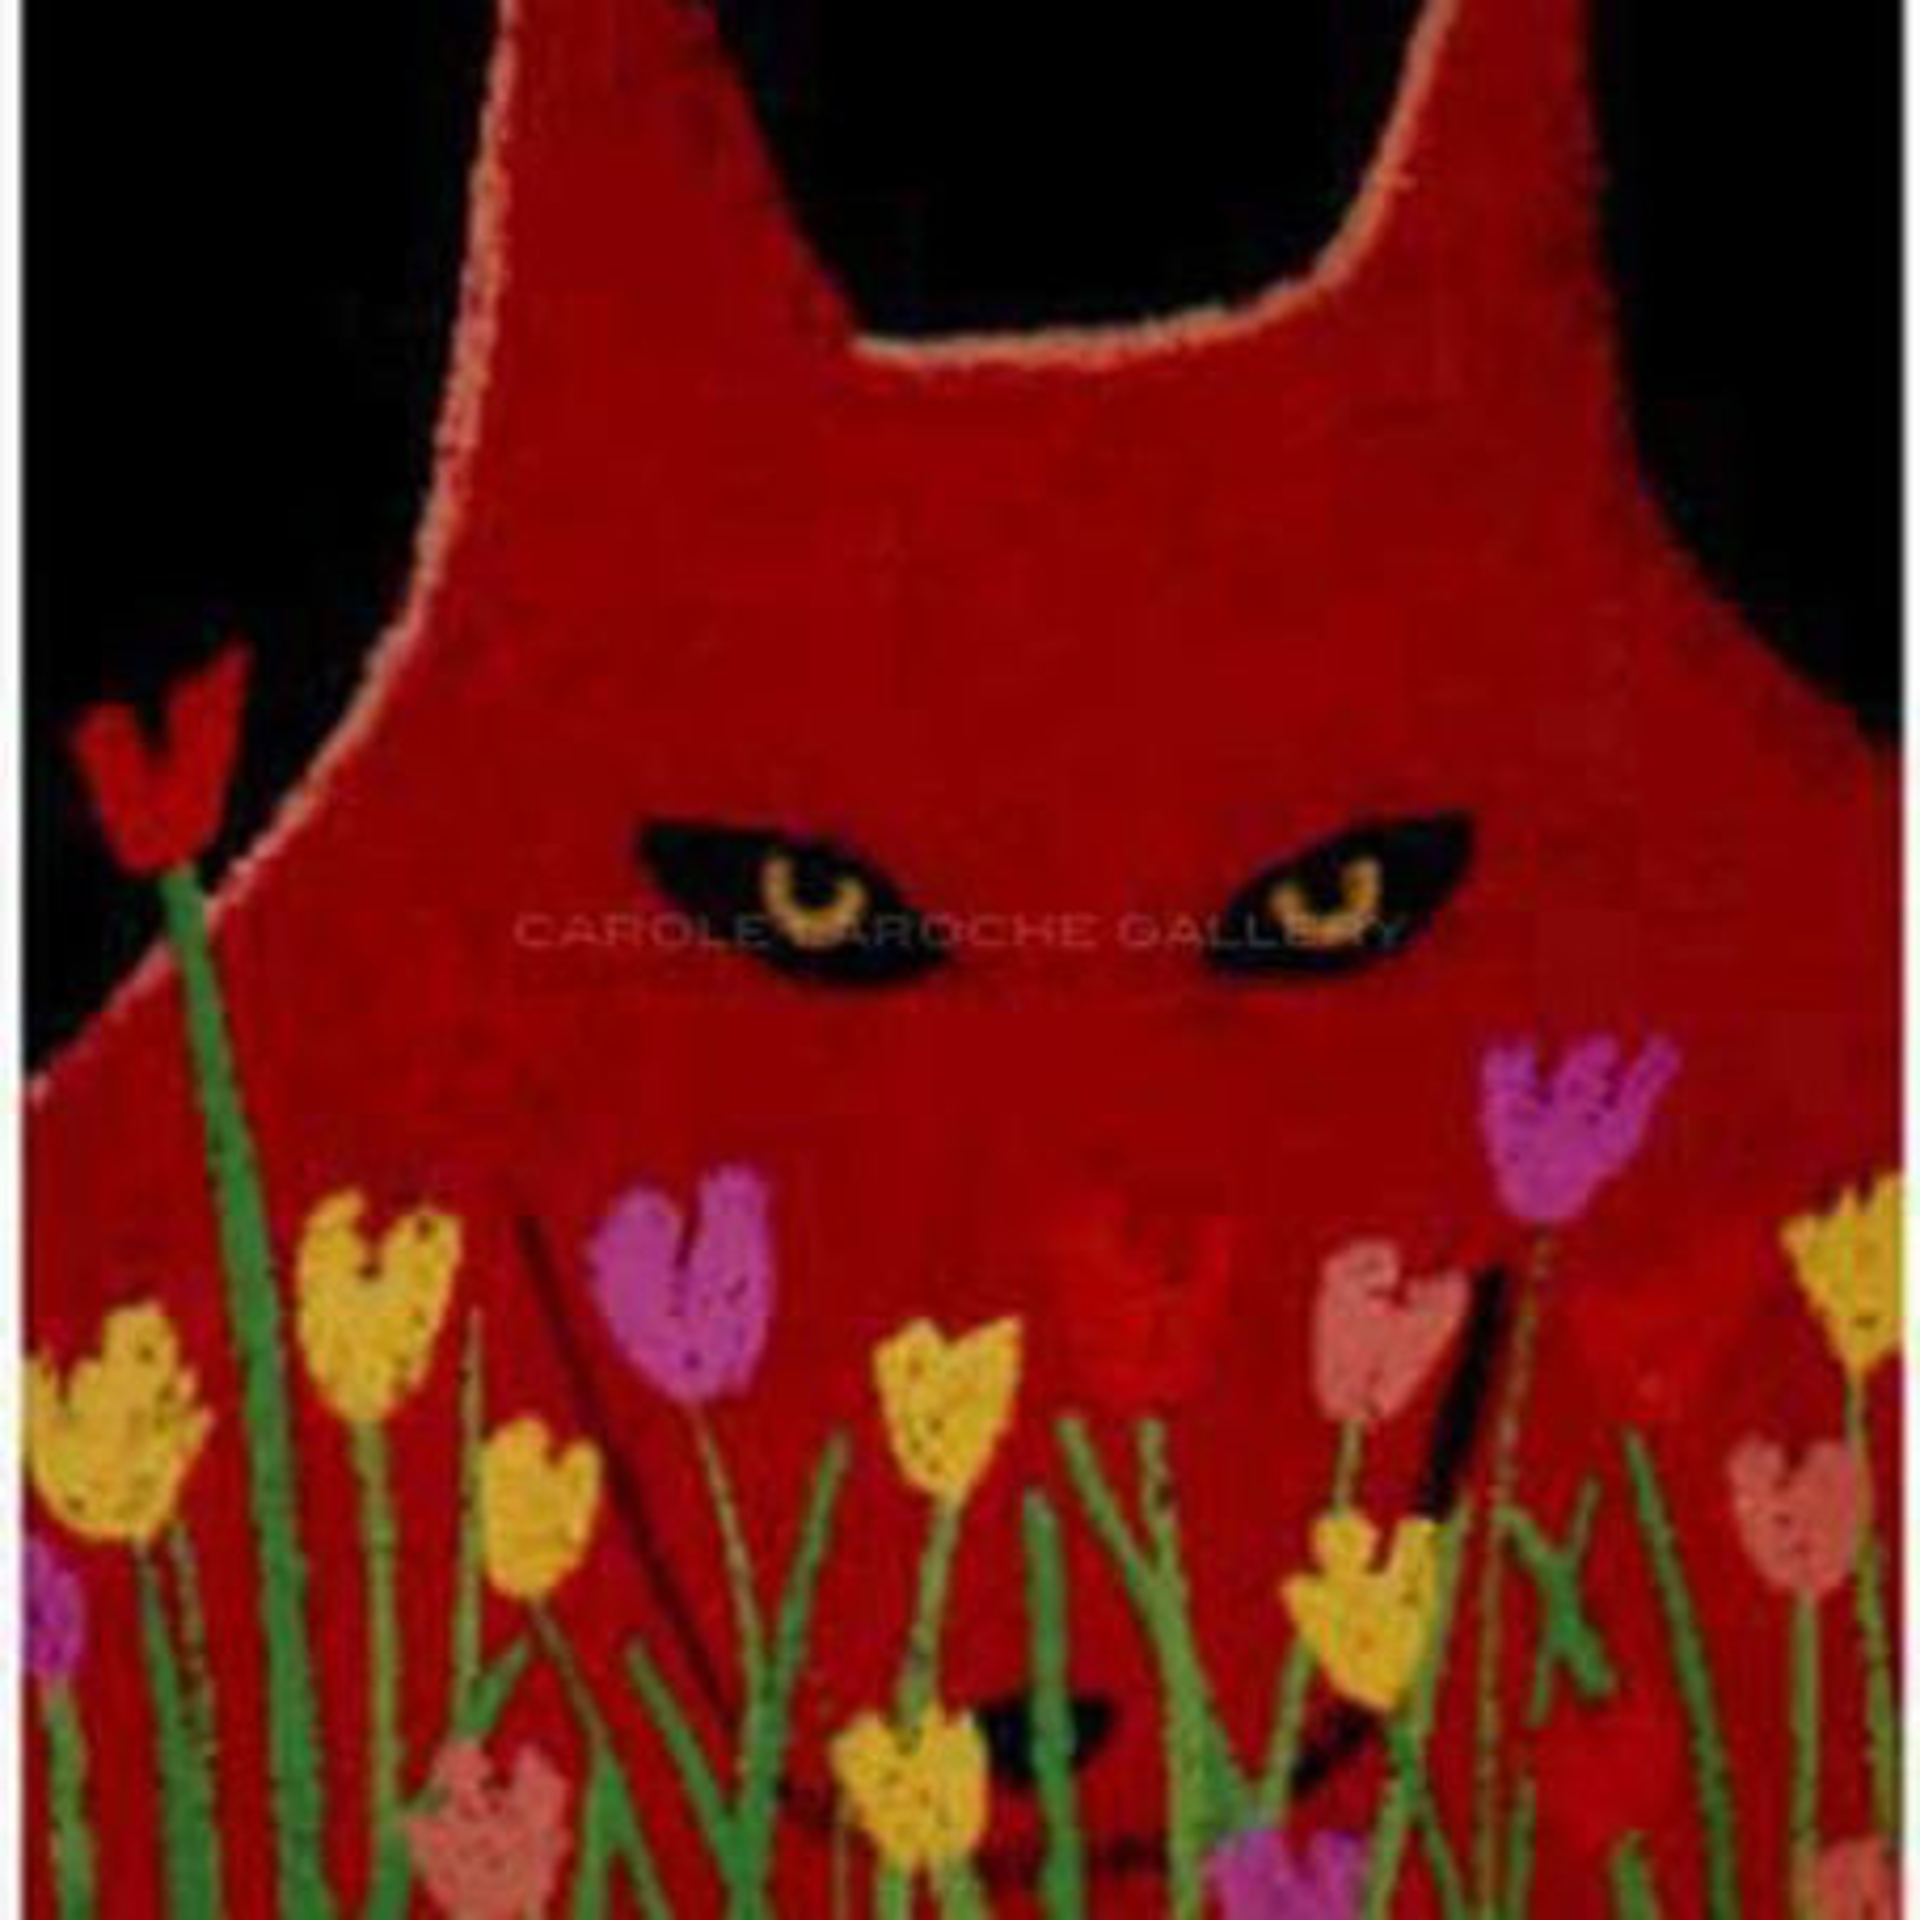 SINGLE RED WOLF AND FLOWERS - limited edition giclee on paper w/frame size of 23"x20" by Carole LaRoche